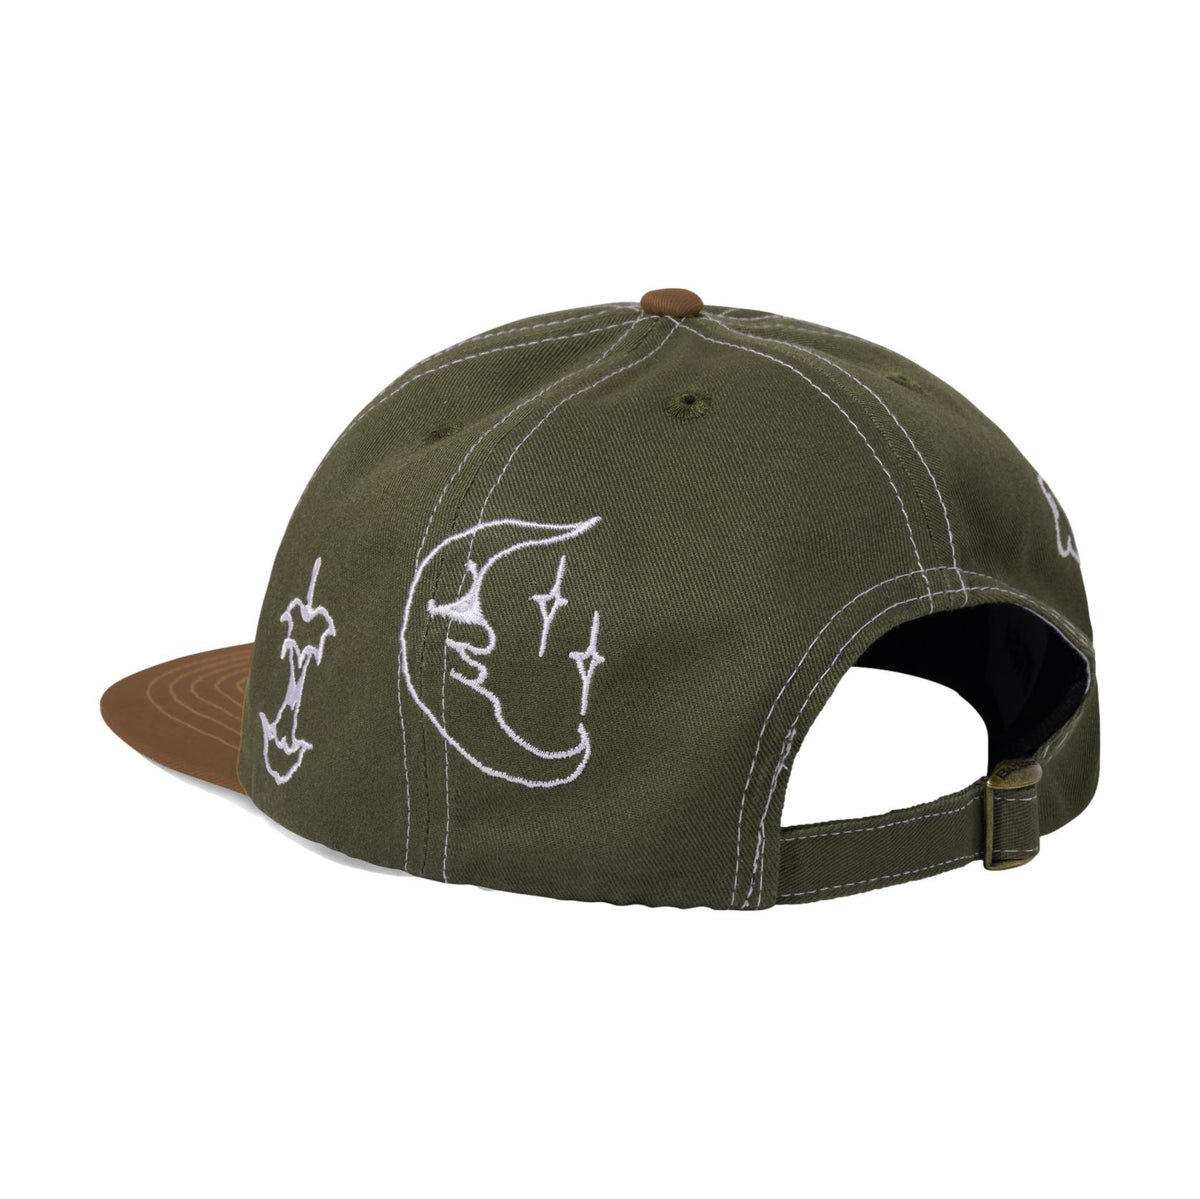 Butter Critter 6 Panel Cap Army/Brown - Venue Skateboards